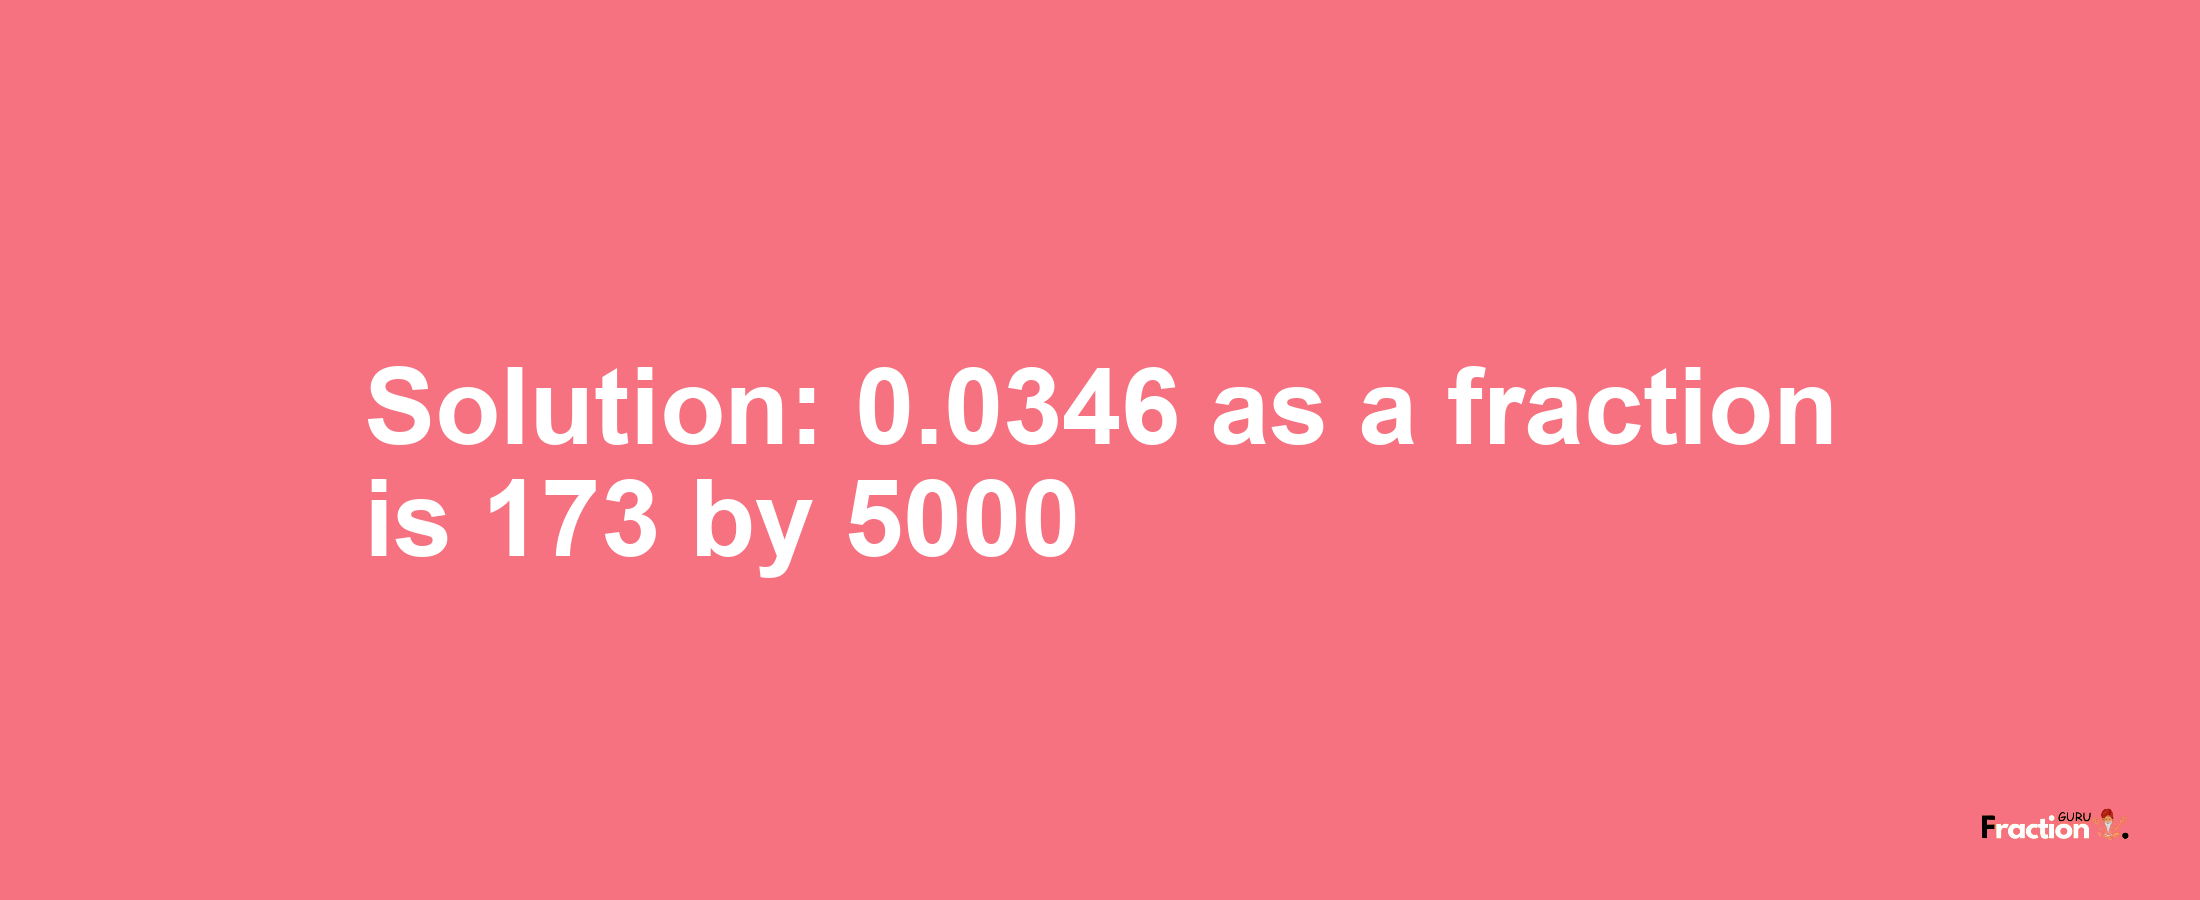 Solution:0.0346 as a fraction is 173/5000